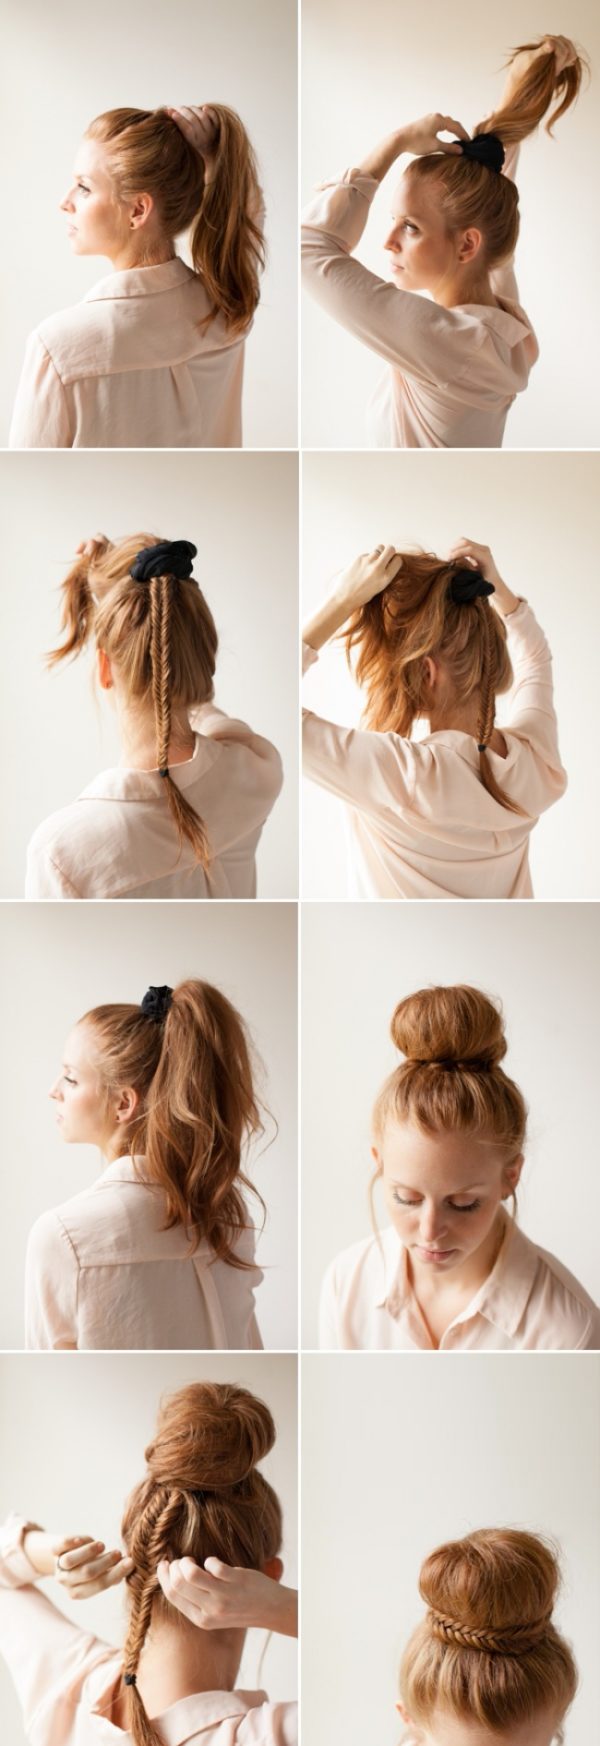 8 Elegant Hairstyles For Any Official Occasion